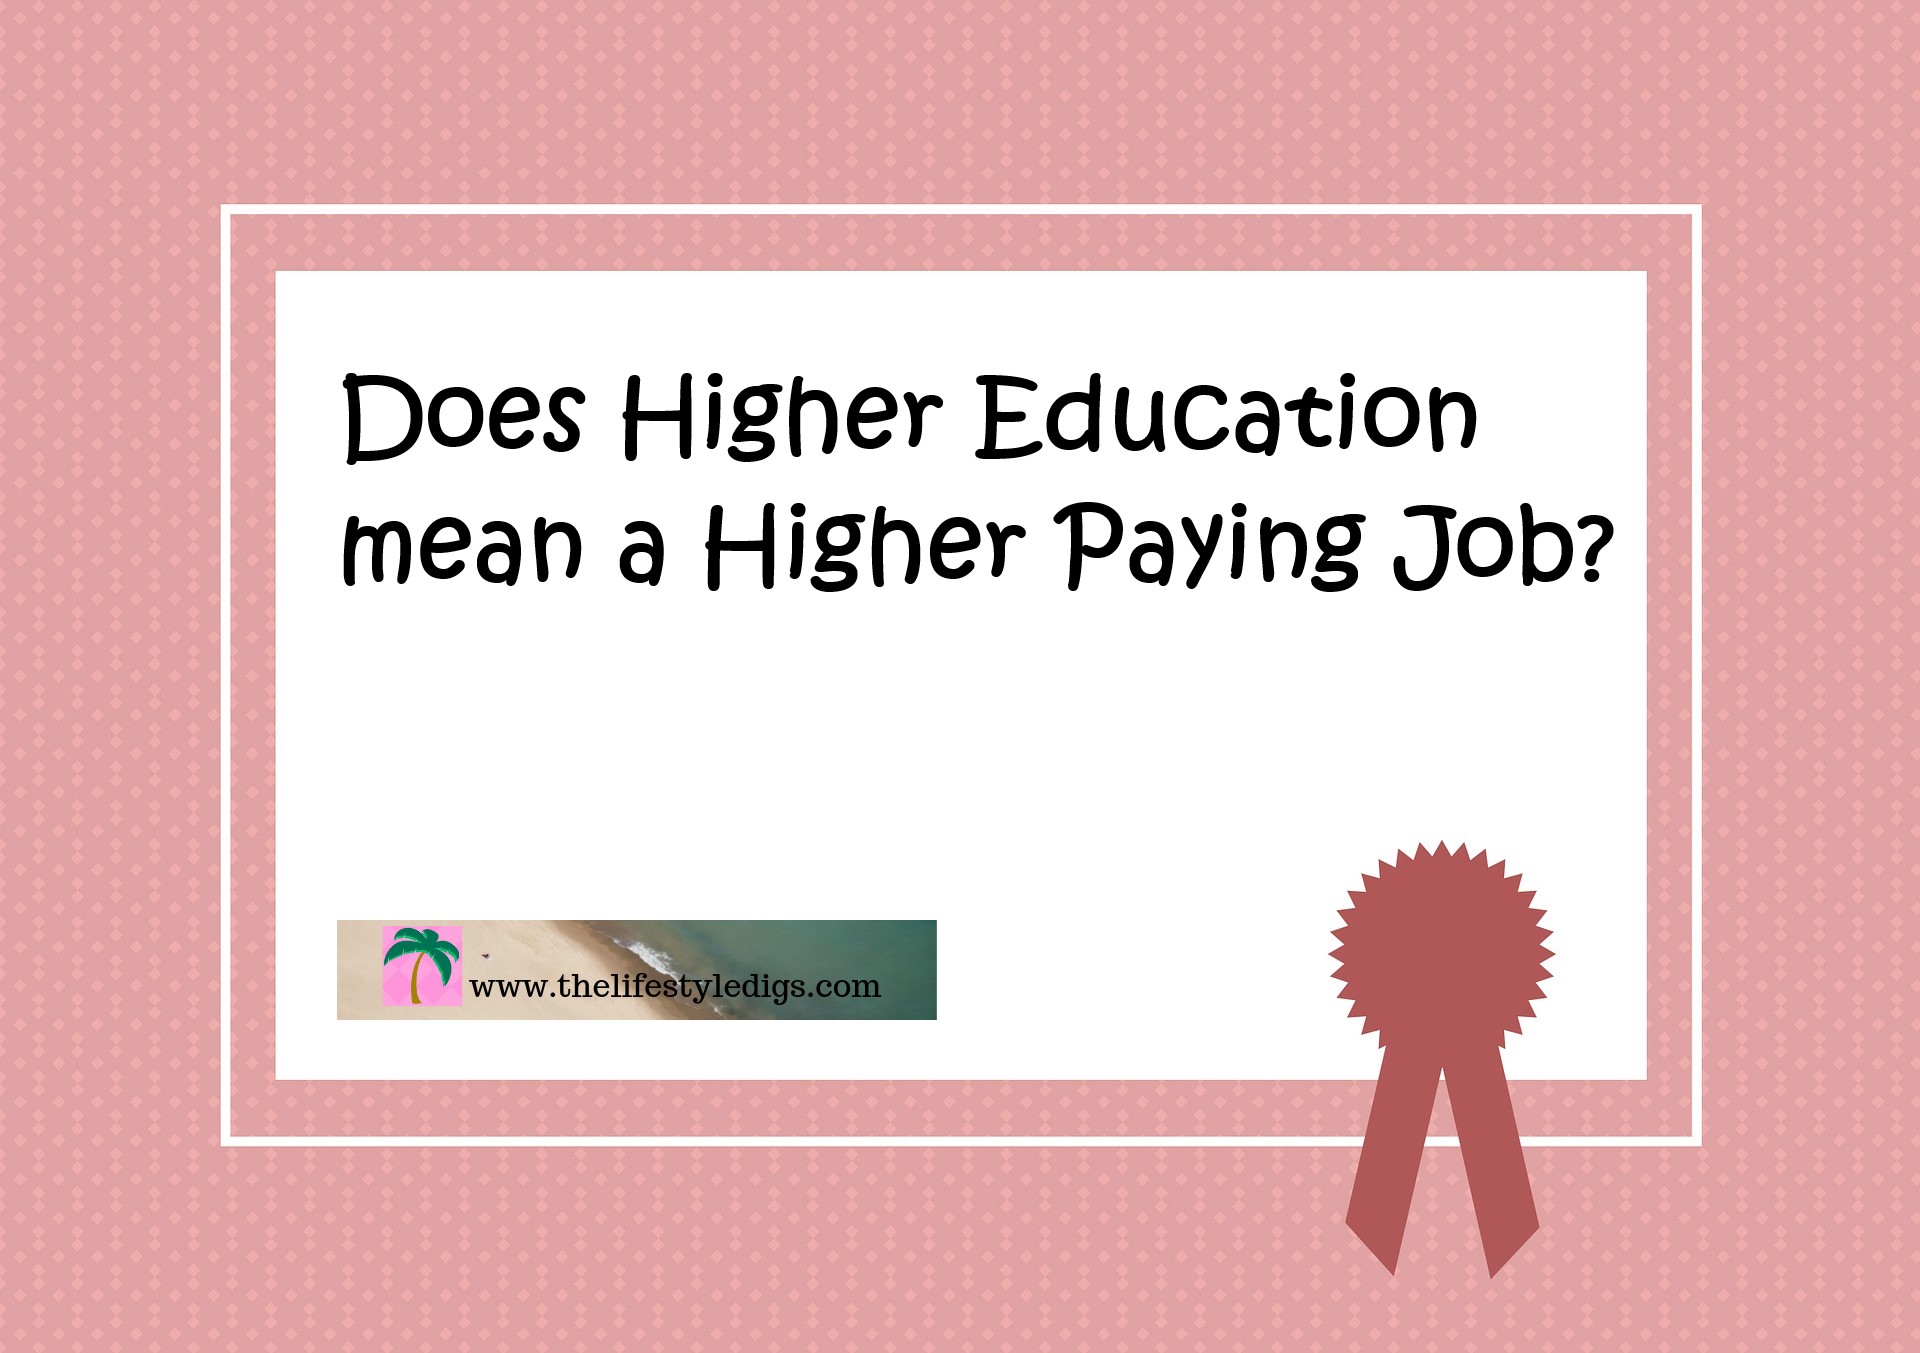 Does Higher Education mean a Higher Paying Job?